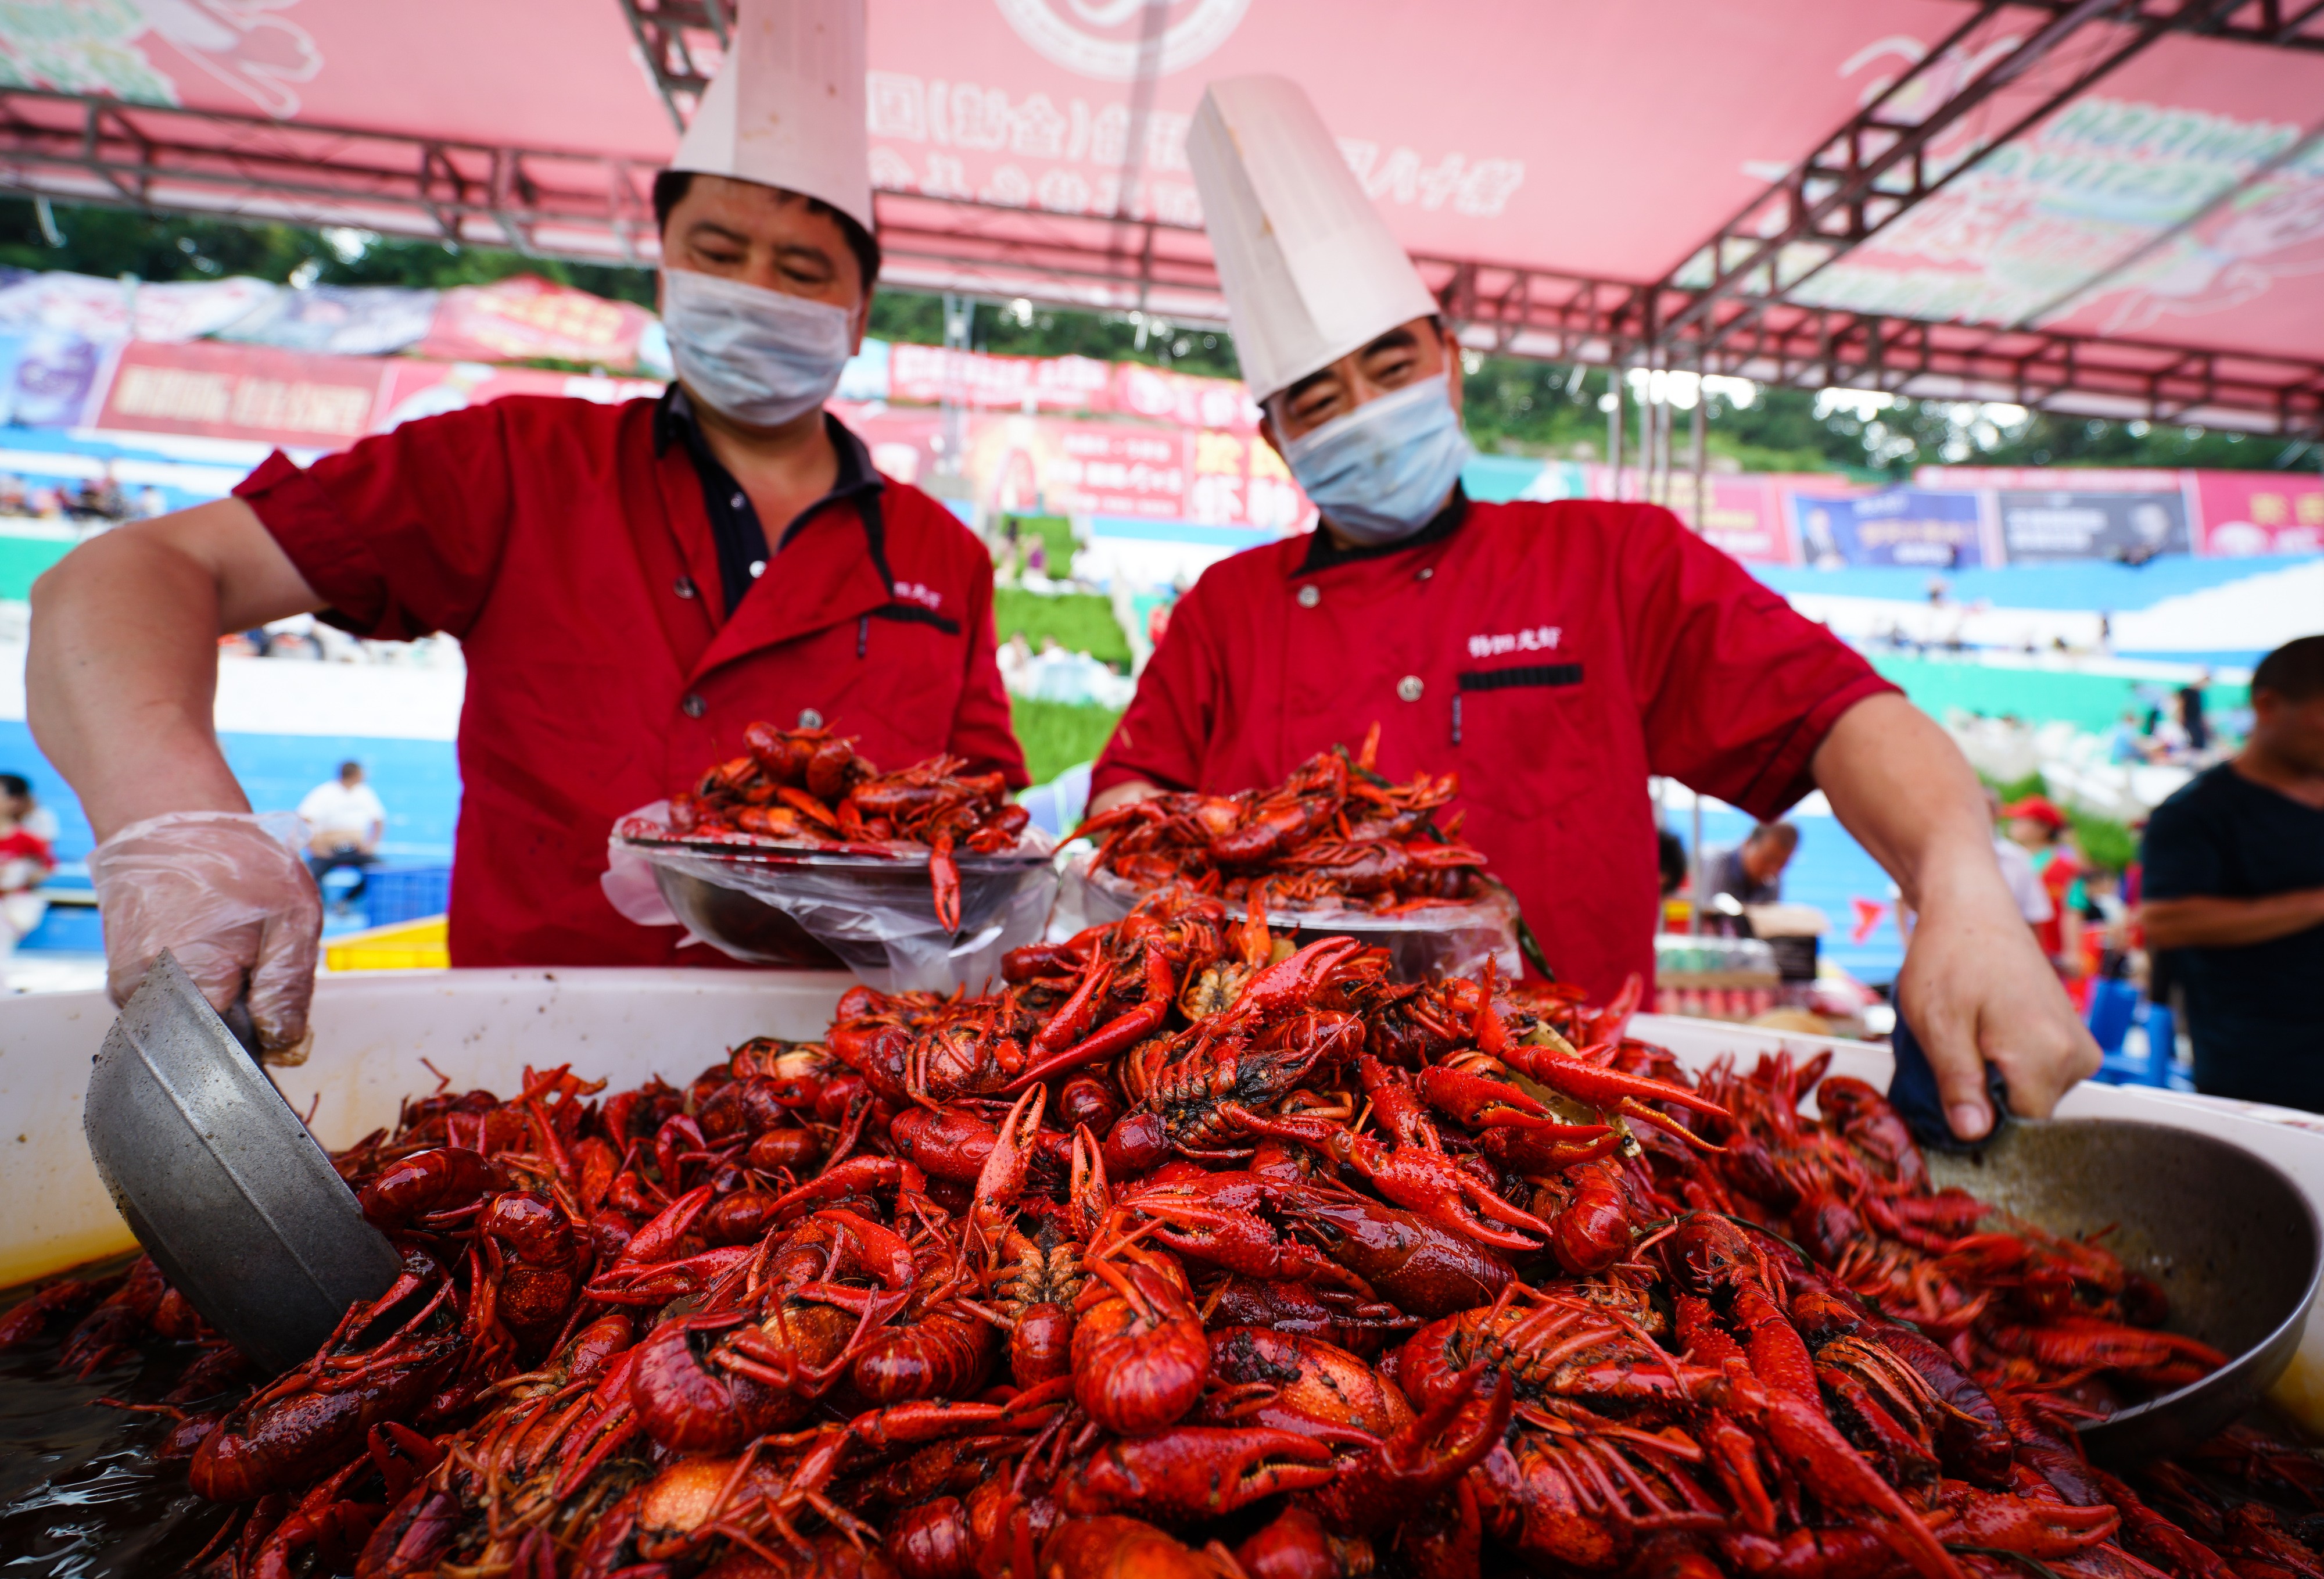 Vendors at a crayfish banquet in Xuyi, east China's Jiangsu Province, on June 13, 2018. The crustacean has become an enormously popular delicacy in recent years. Photo: Xinhua